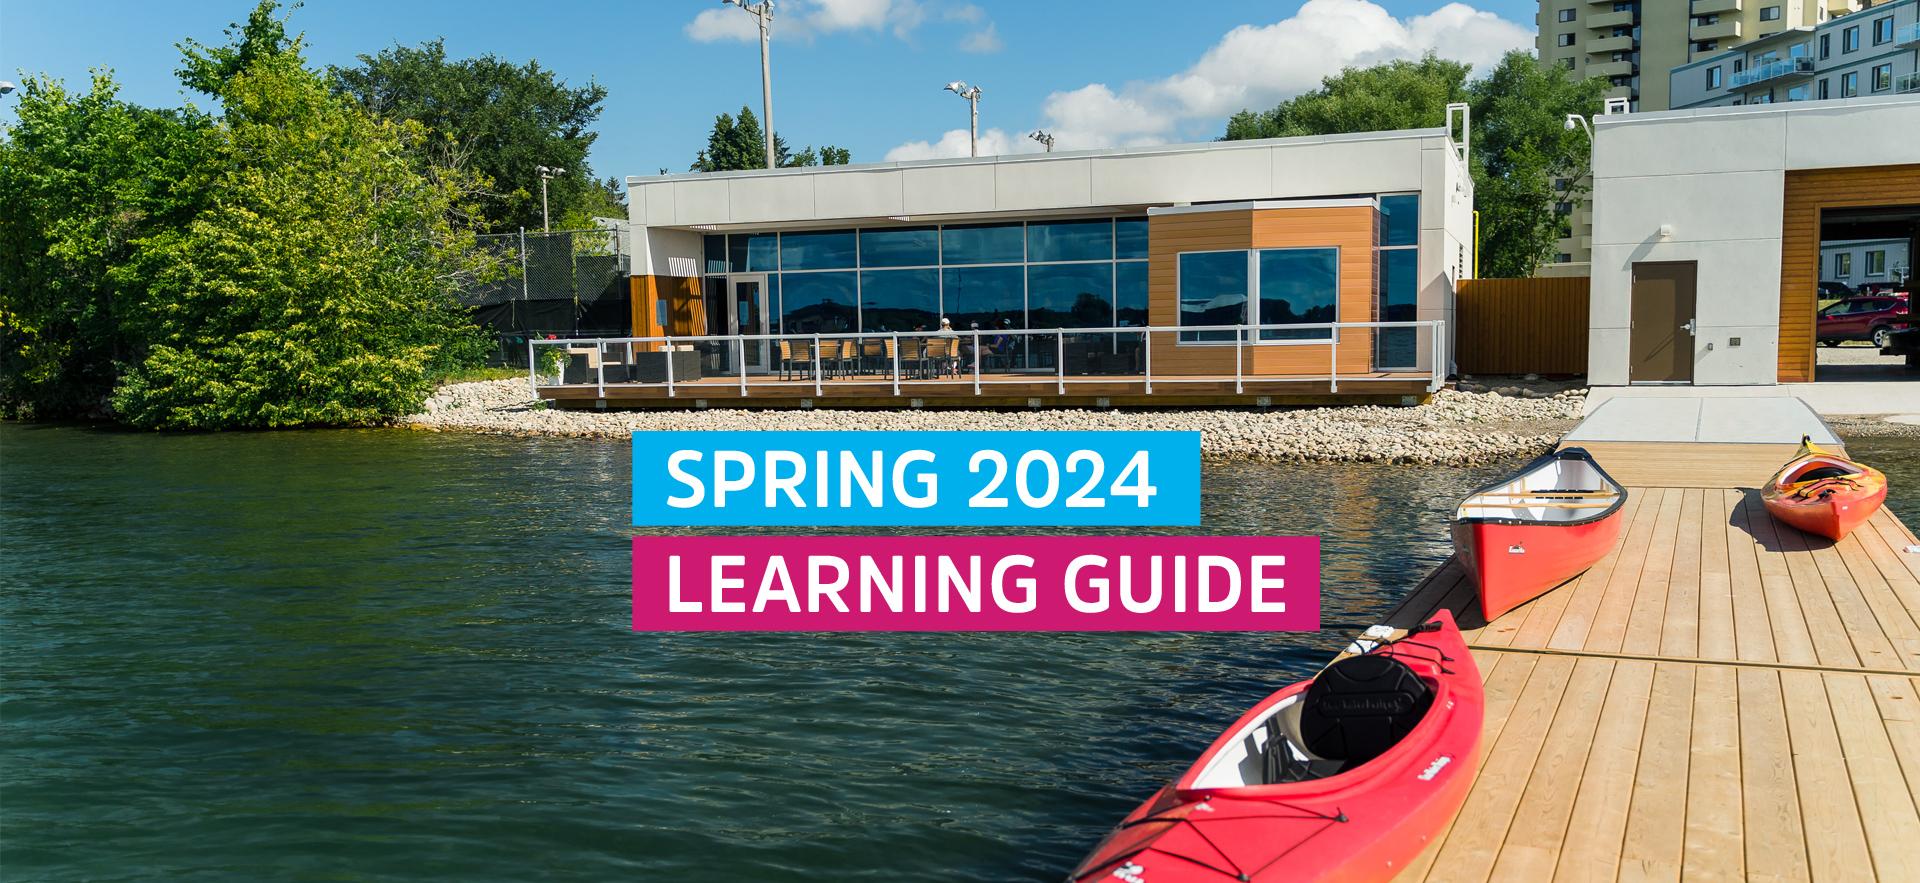 Waterfront Adventure Centre building and dock with canoes photo with Spring 2024 Learning Guide text